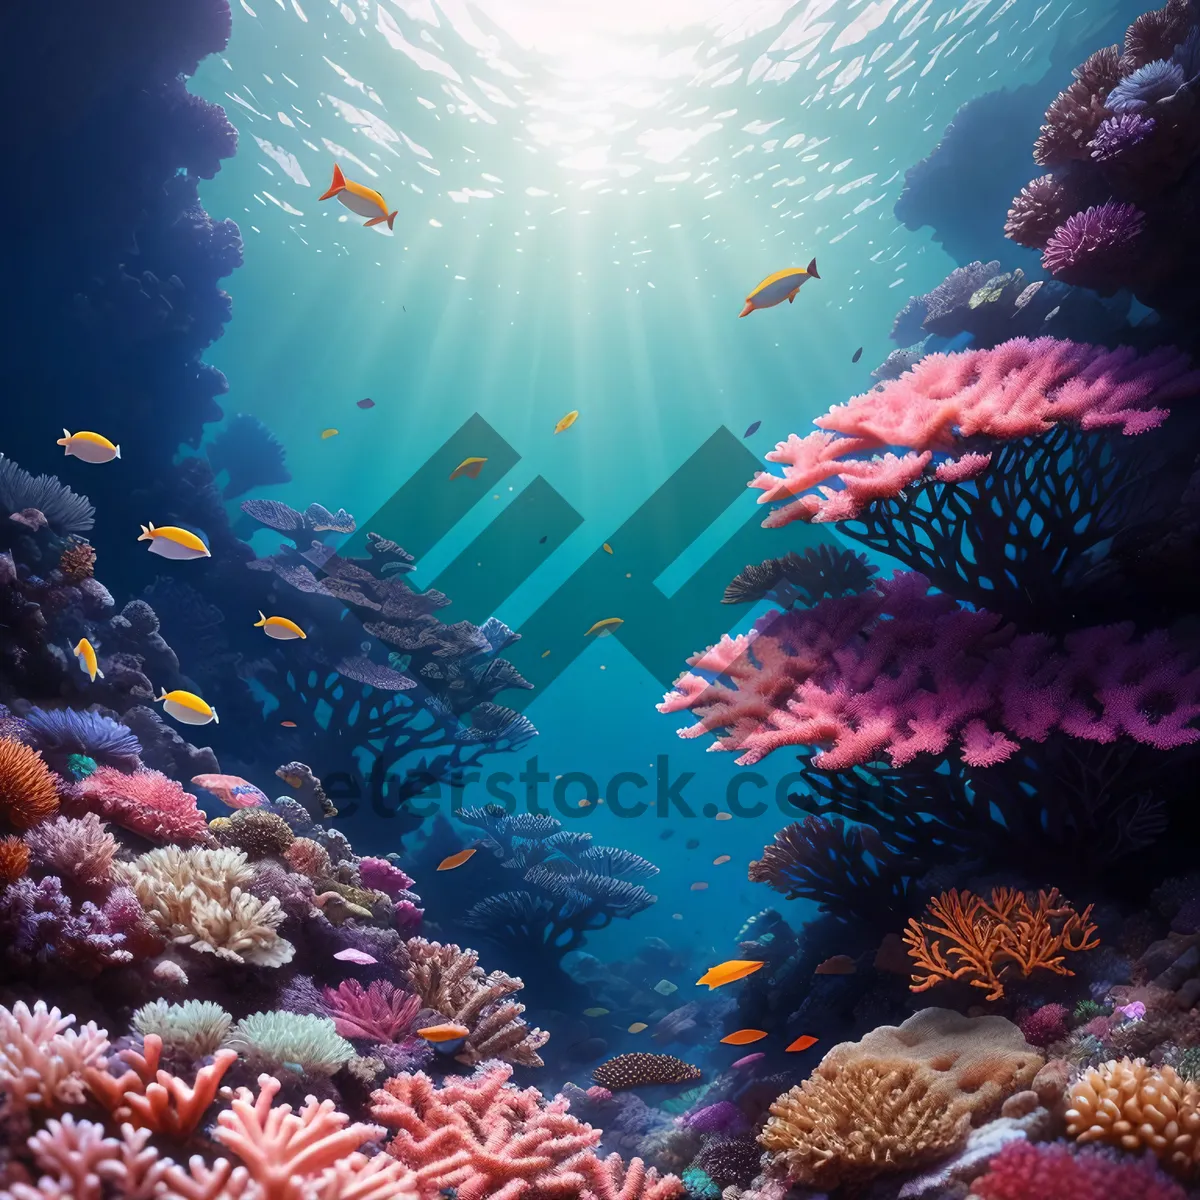 Picture of Colorful Coral Reef Amidst Tranquil Underwater Life